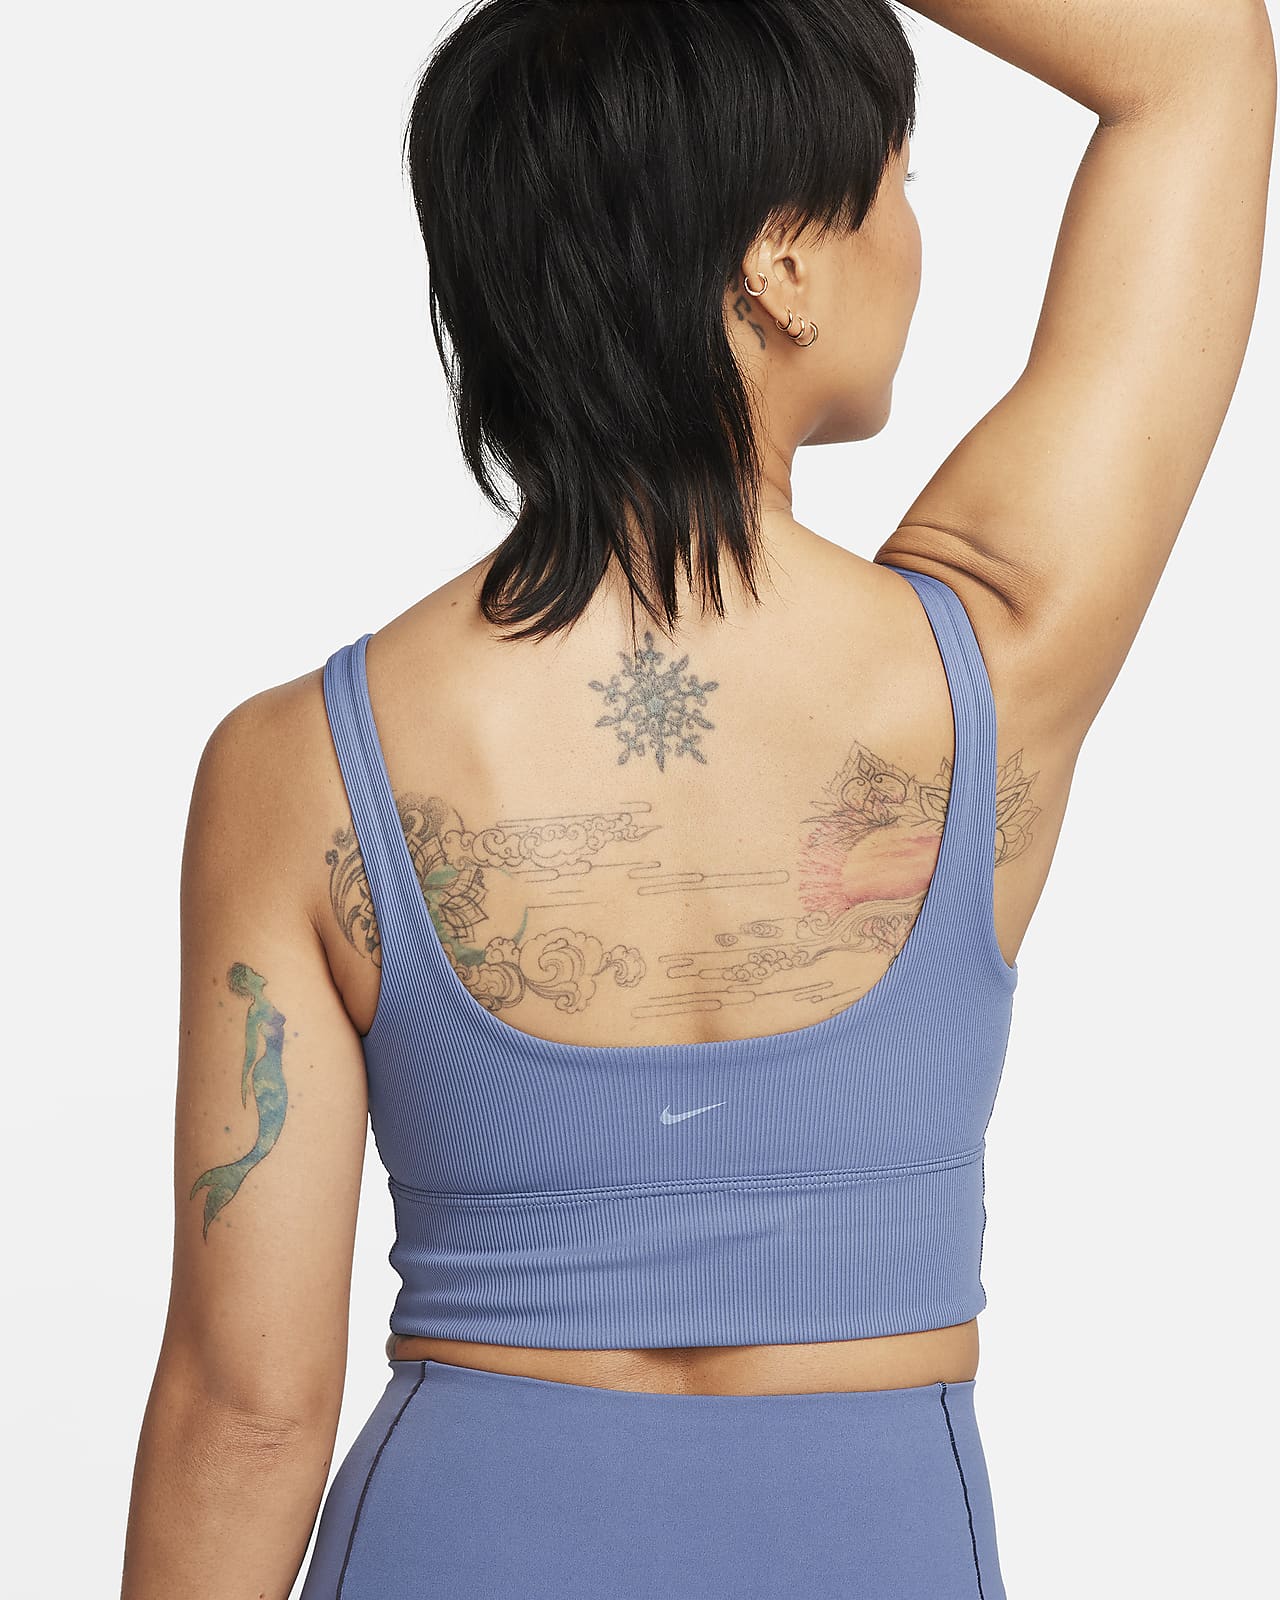 Nike - Women's Indy Light-Support Padded Graphic Sports Bra - MEDIUM O –  The WOD Life